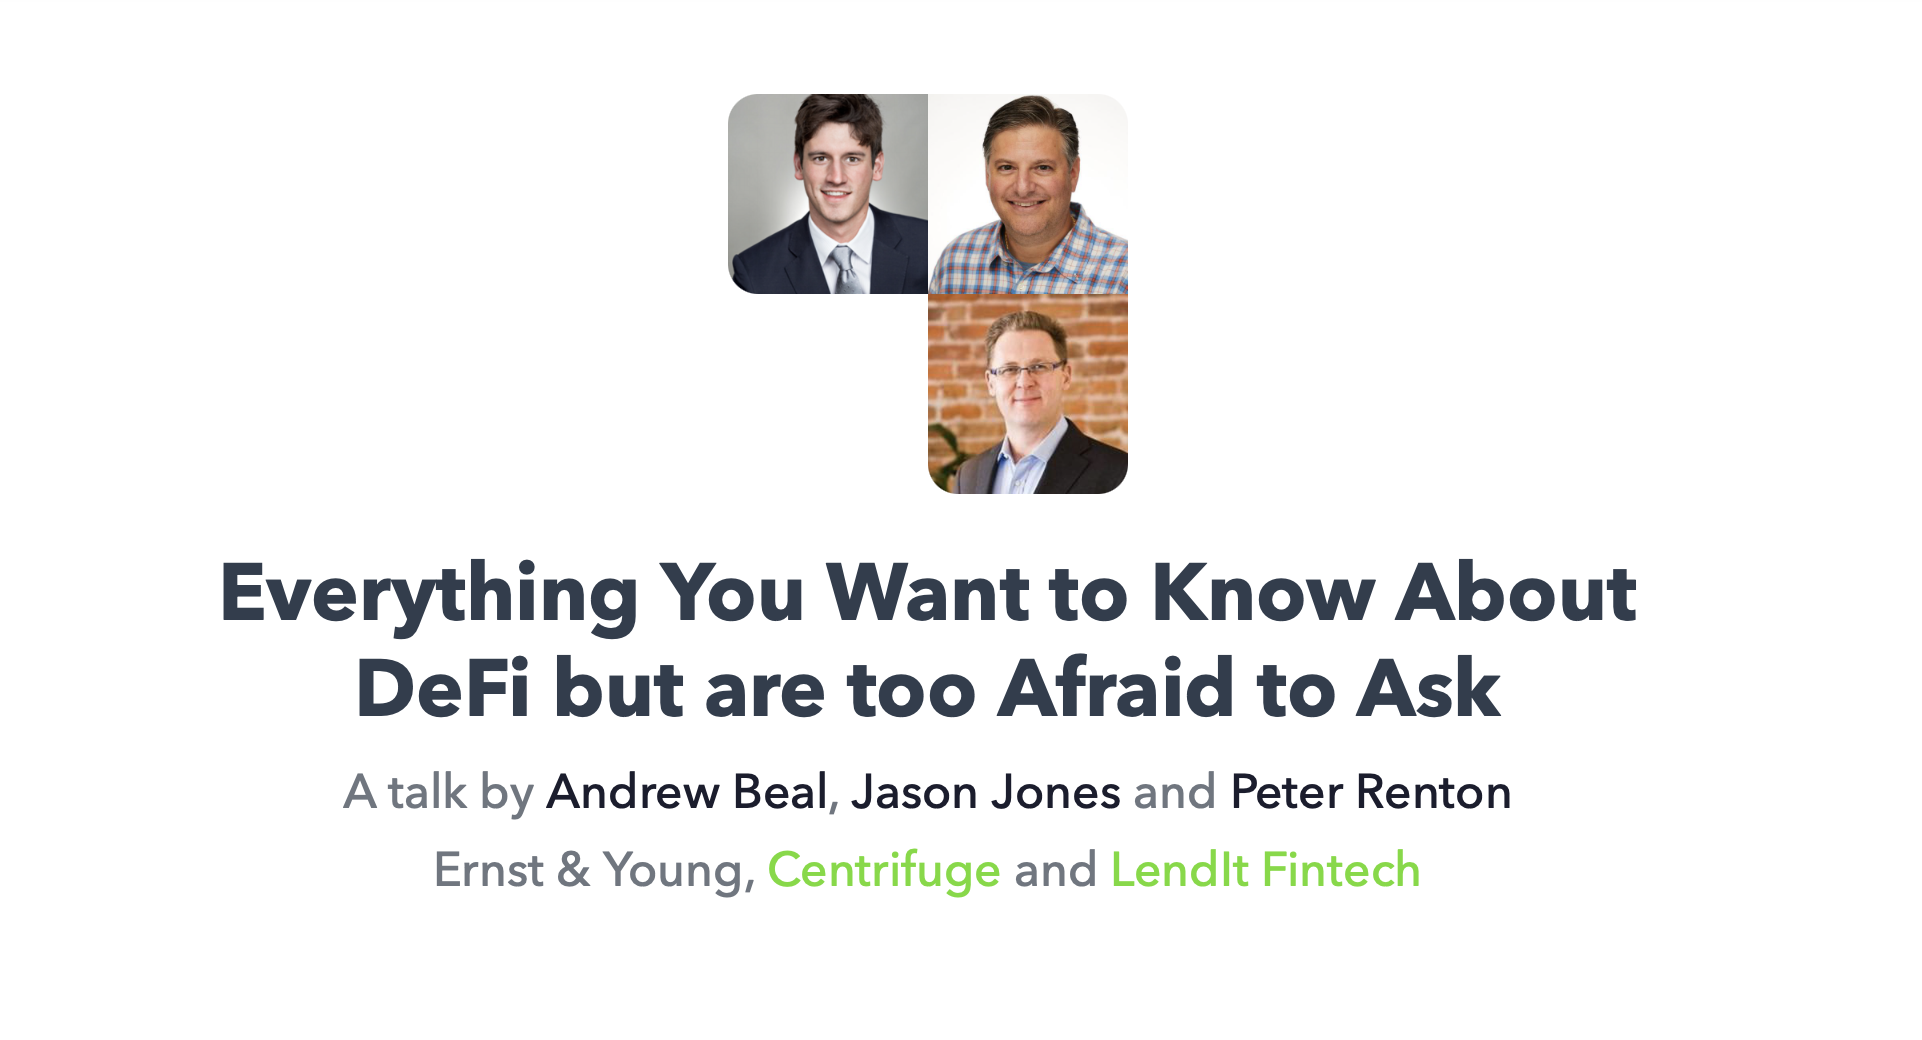 Everything You Want to Know About DeFi but are too Afraid to Ask